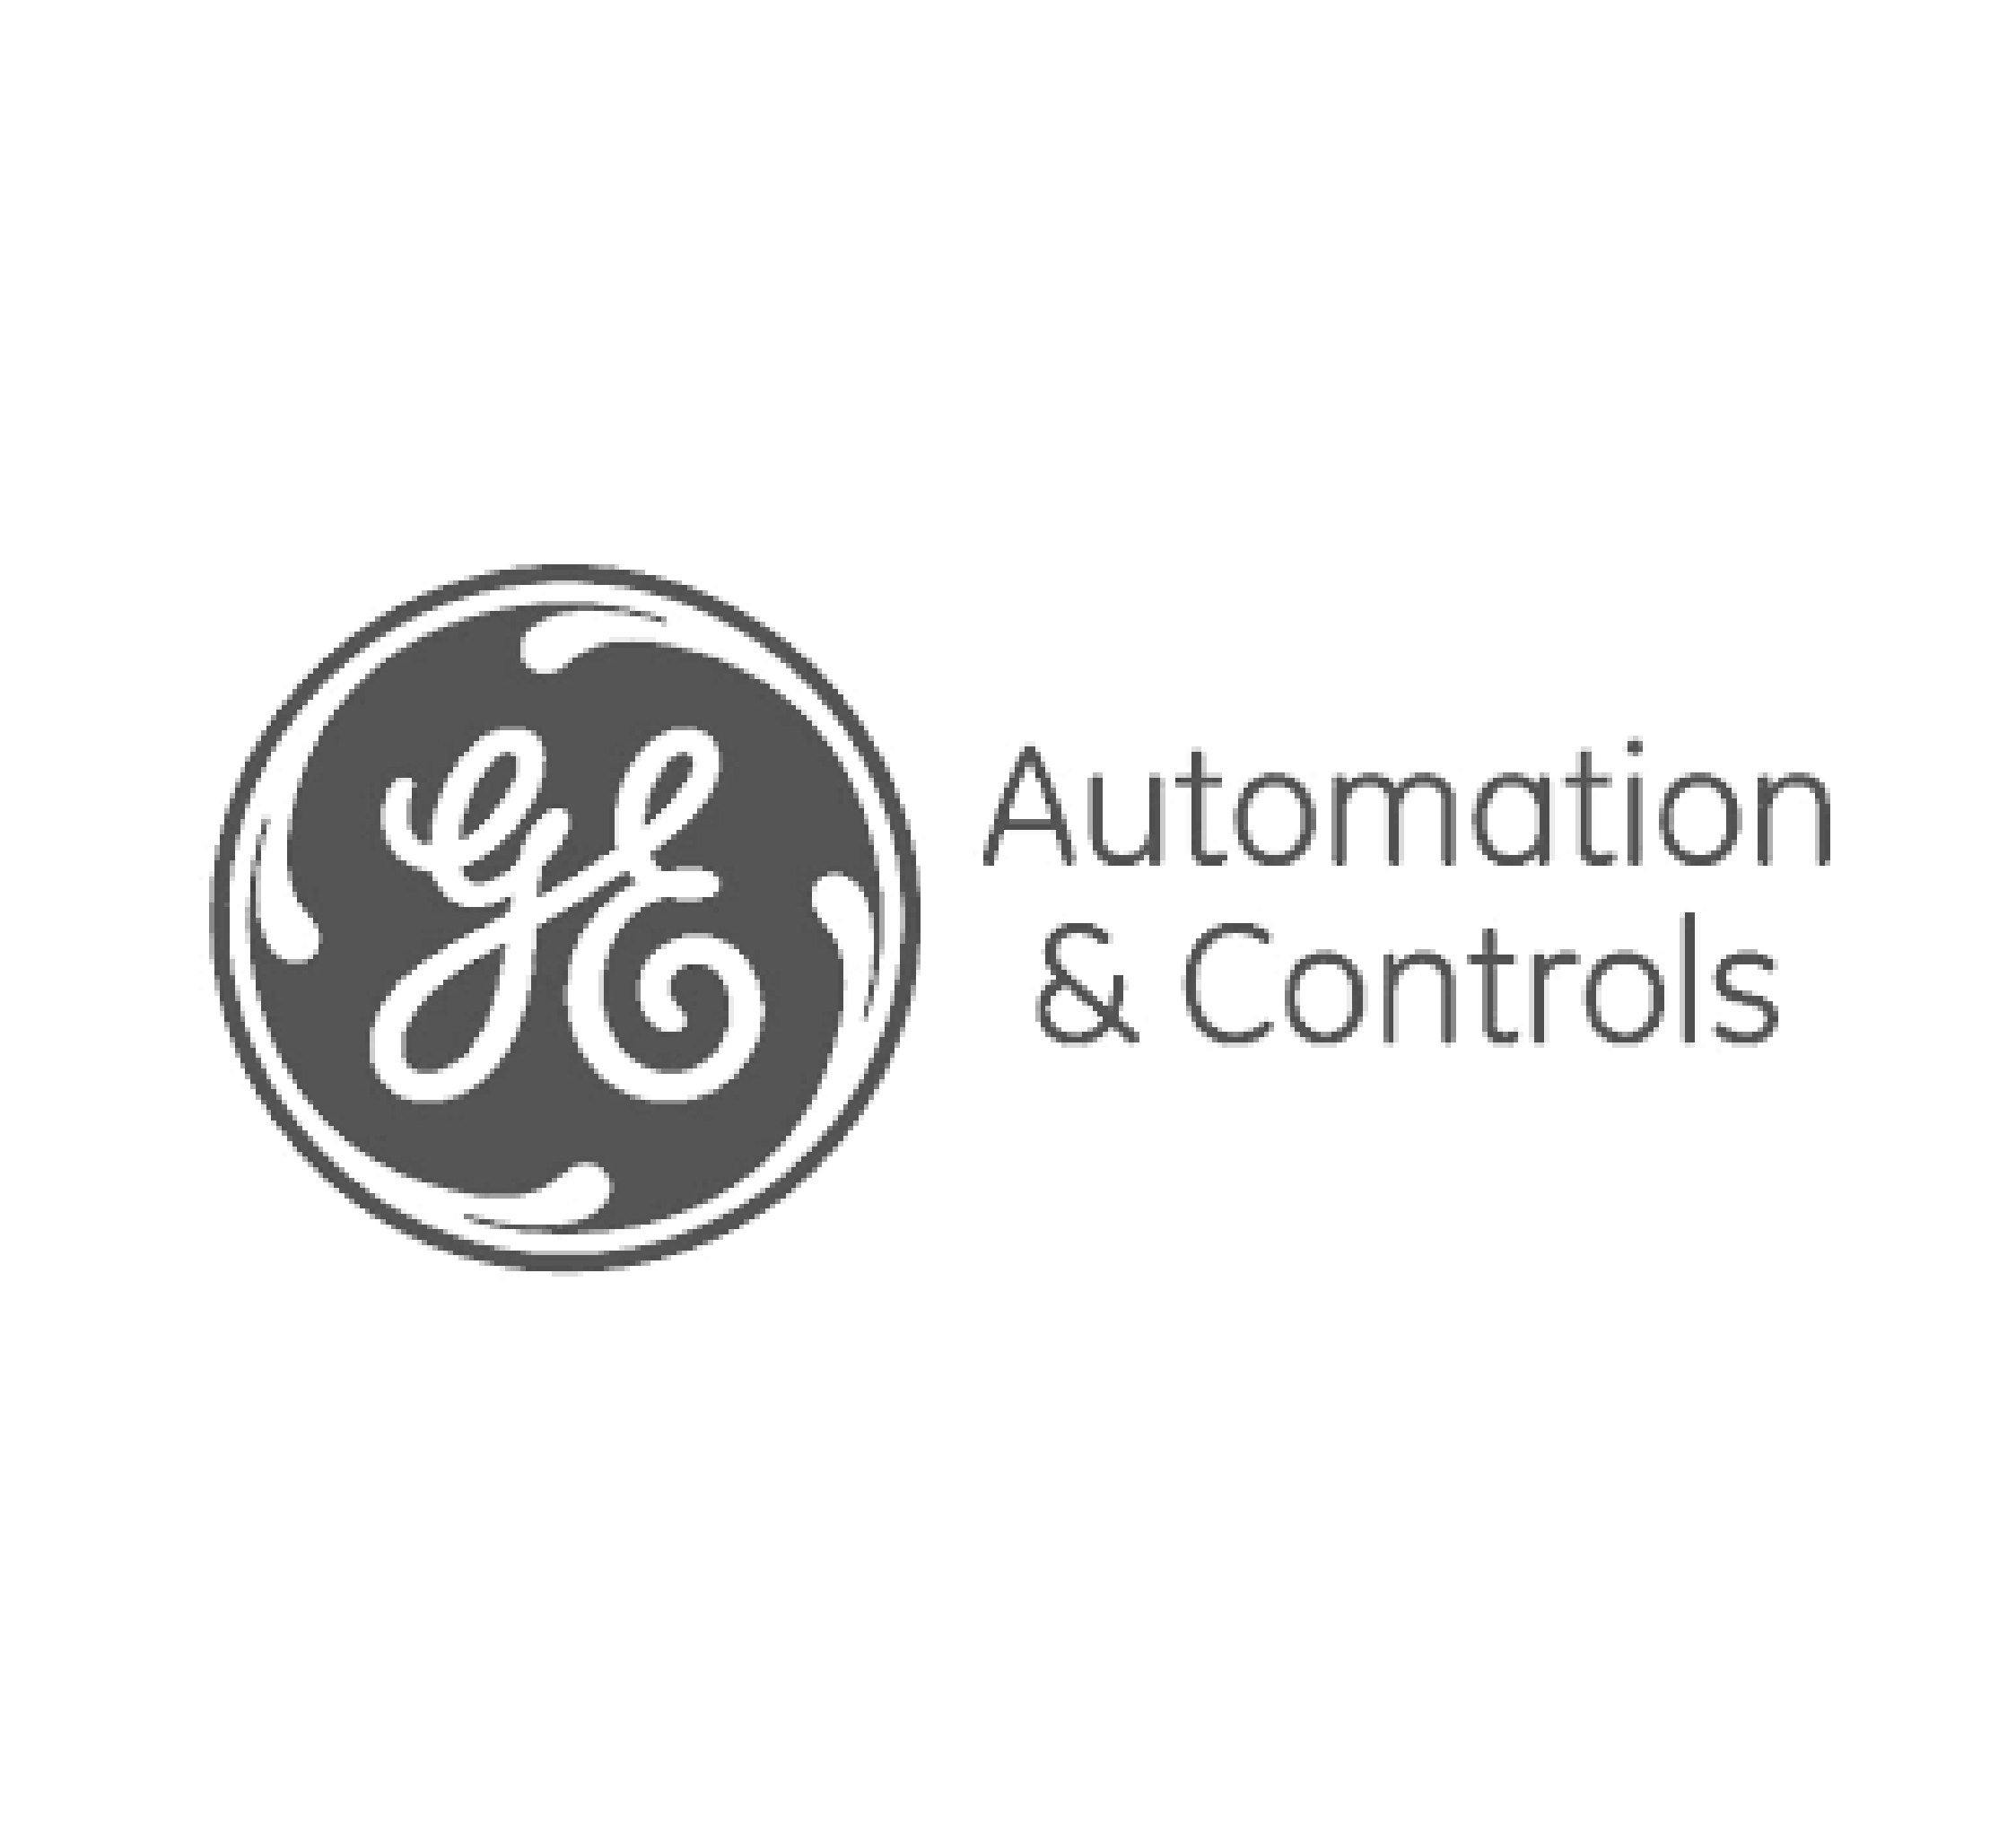 Ge automation & control